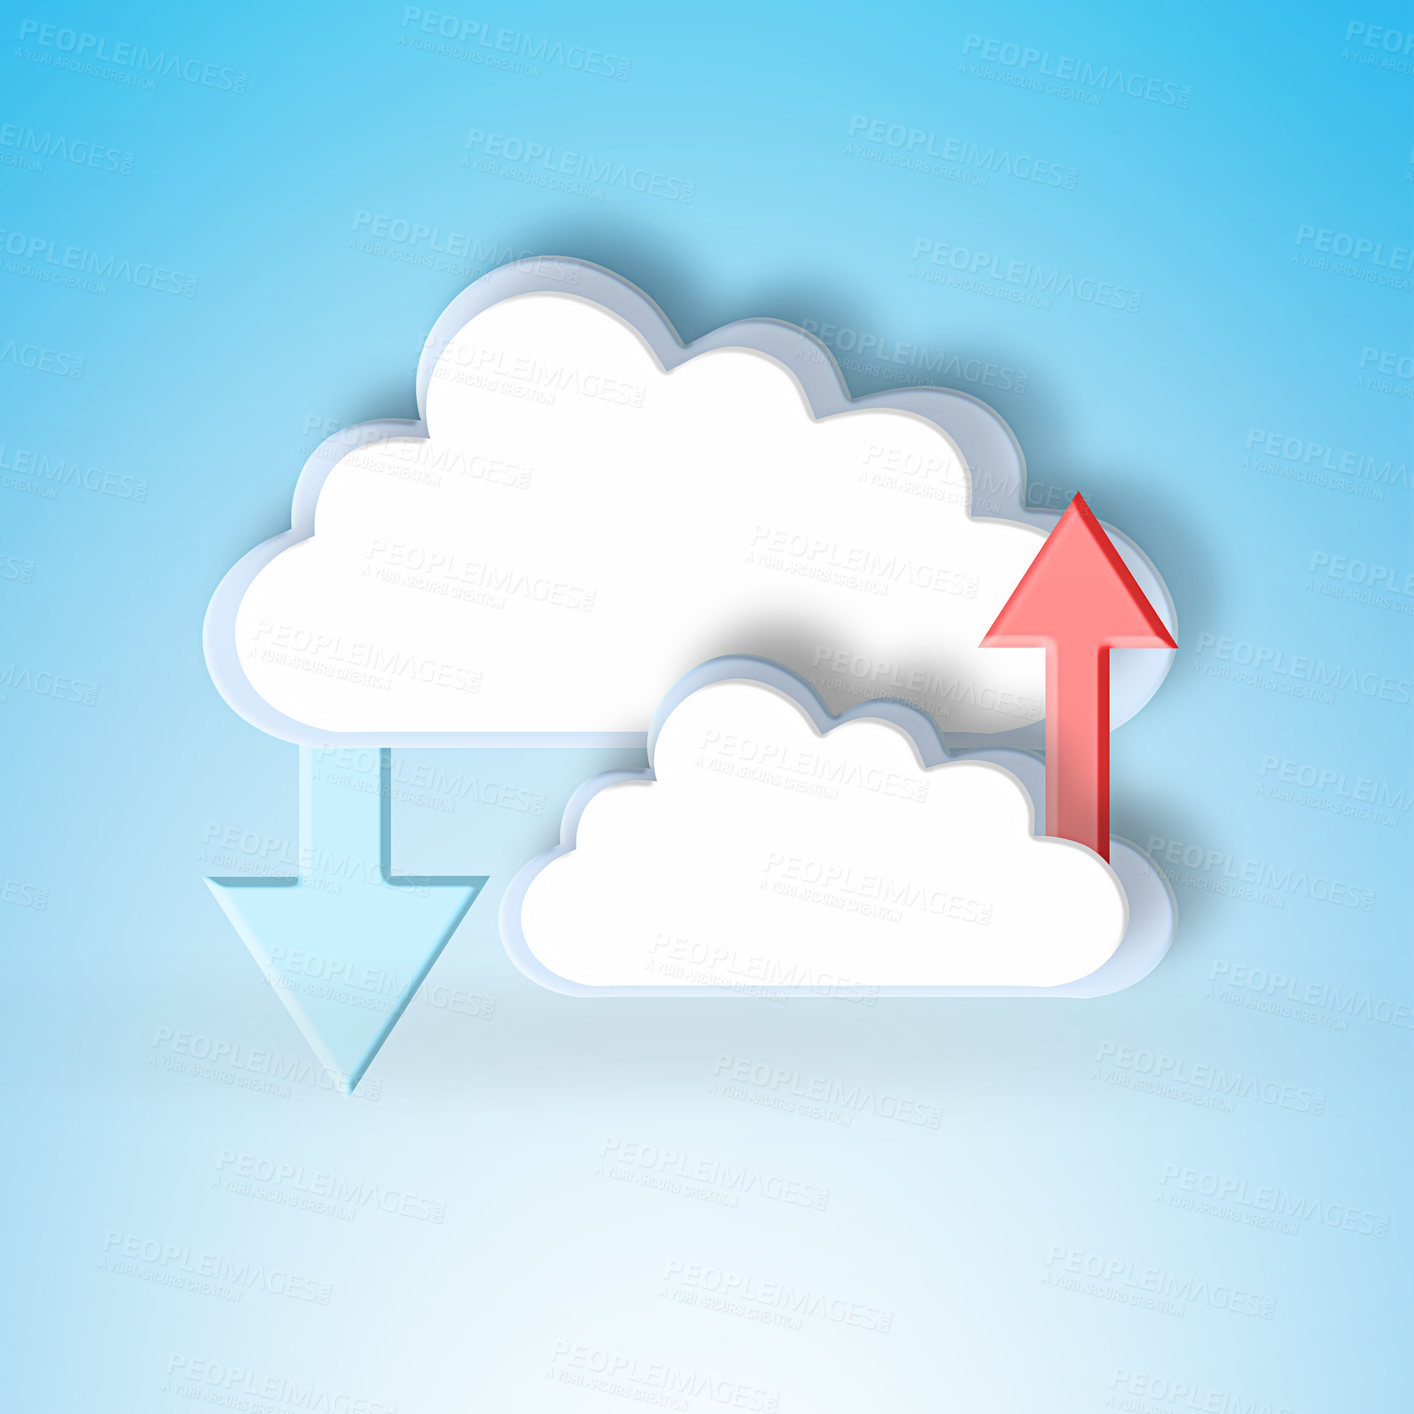 Buy stock photo Cloud computing, graphic and arrow for download for data science, information technology and art on blue background. Networking, storage icon and futuristic it for digital expansion with upload sign